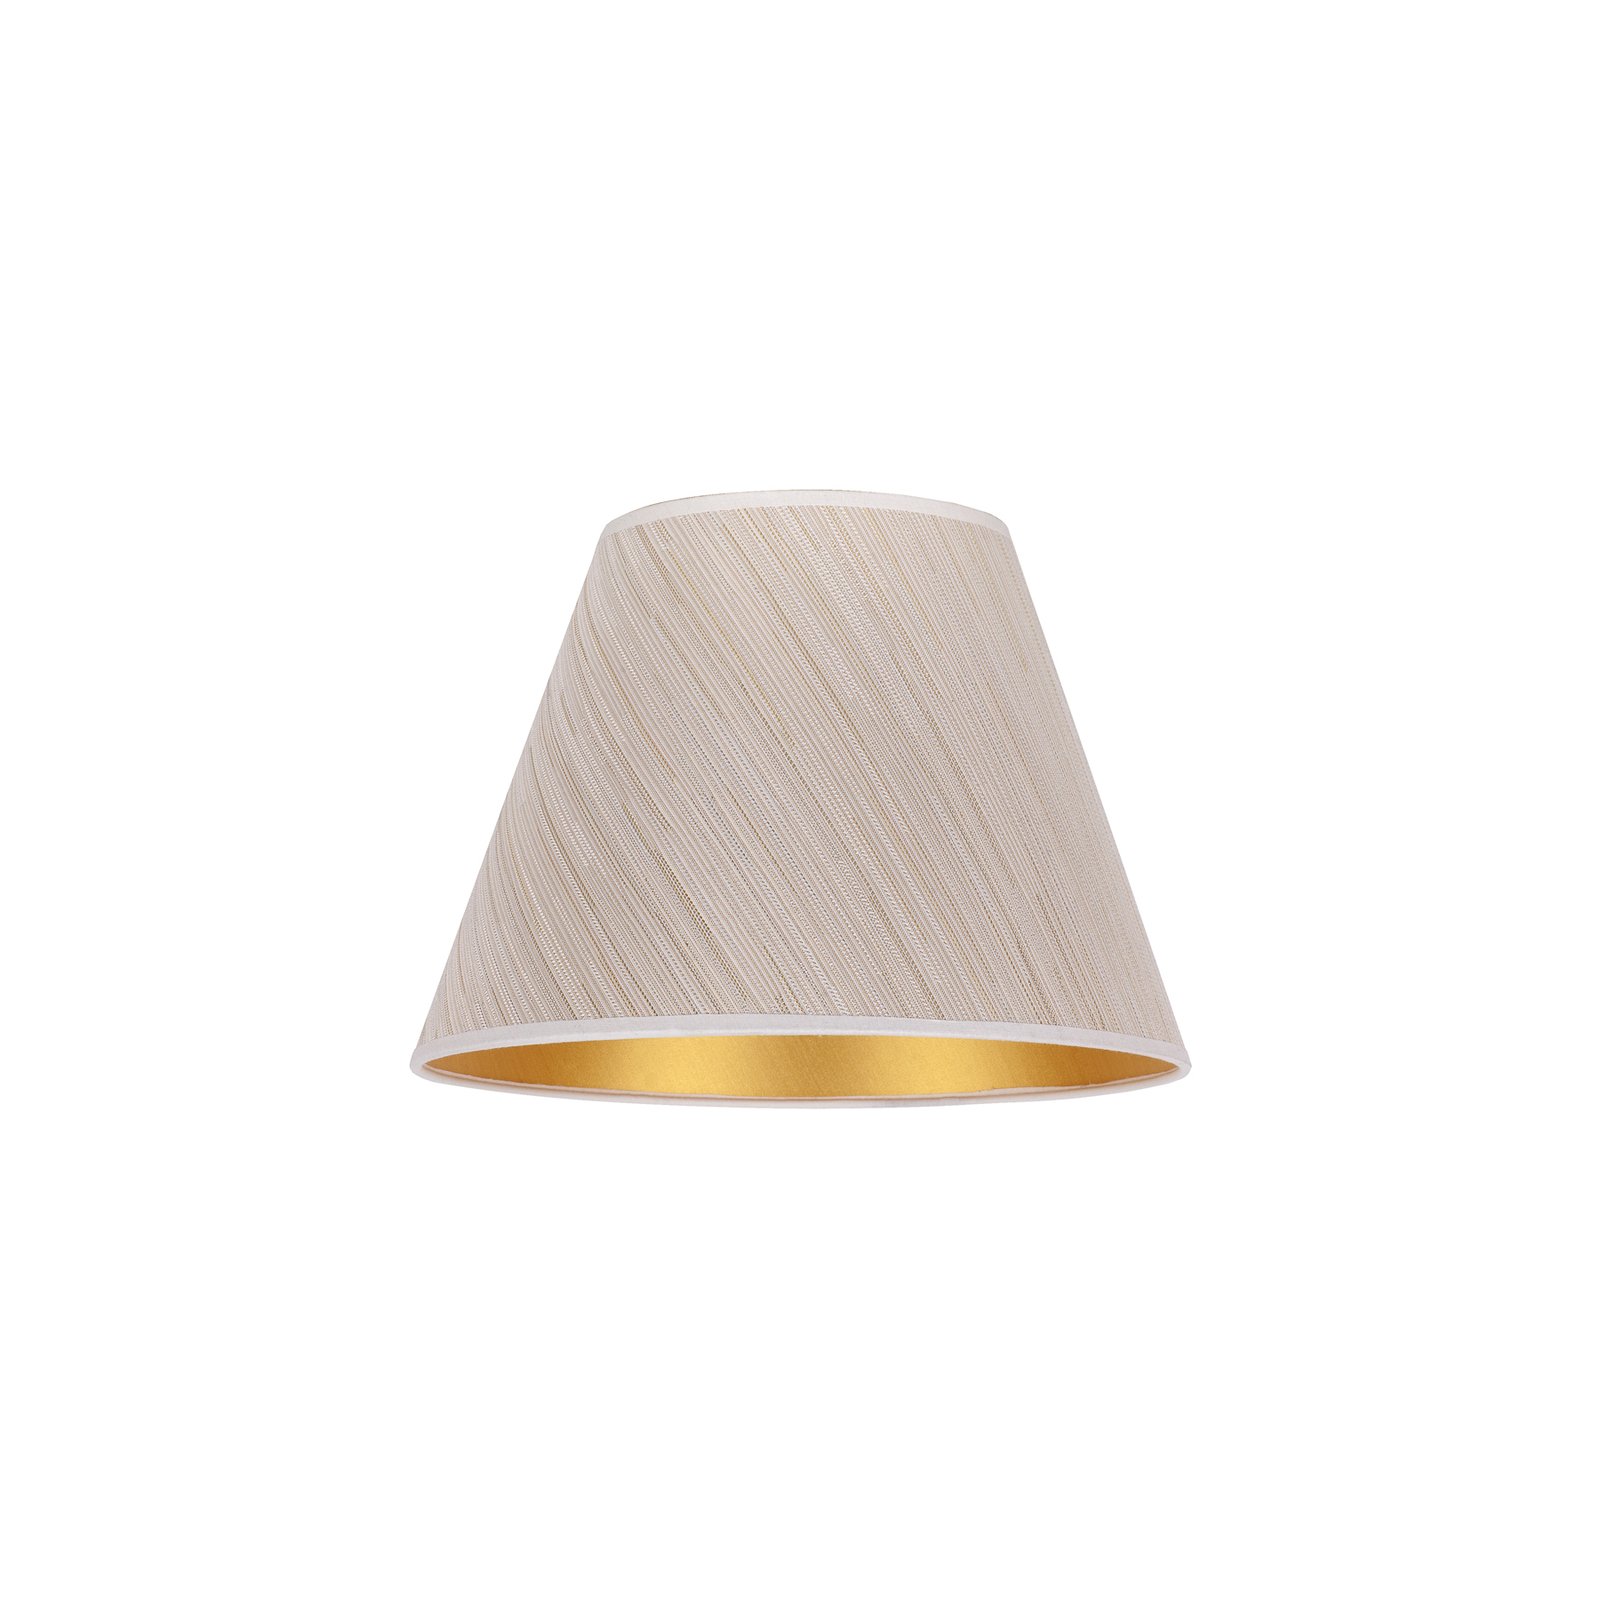 Sofia lampshade height 21 cm, white/gold streaks